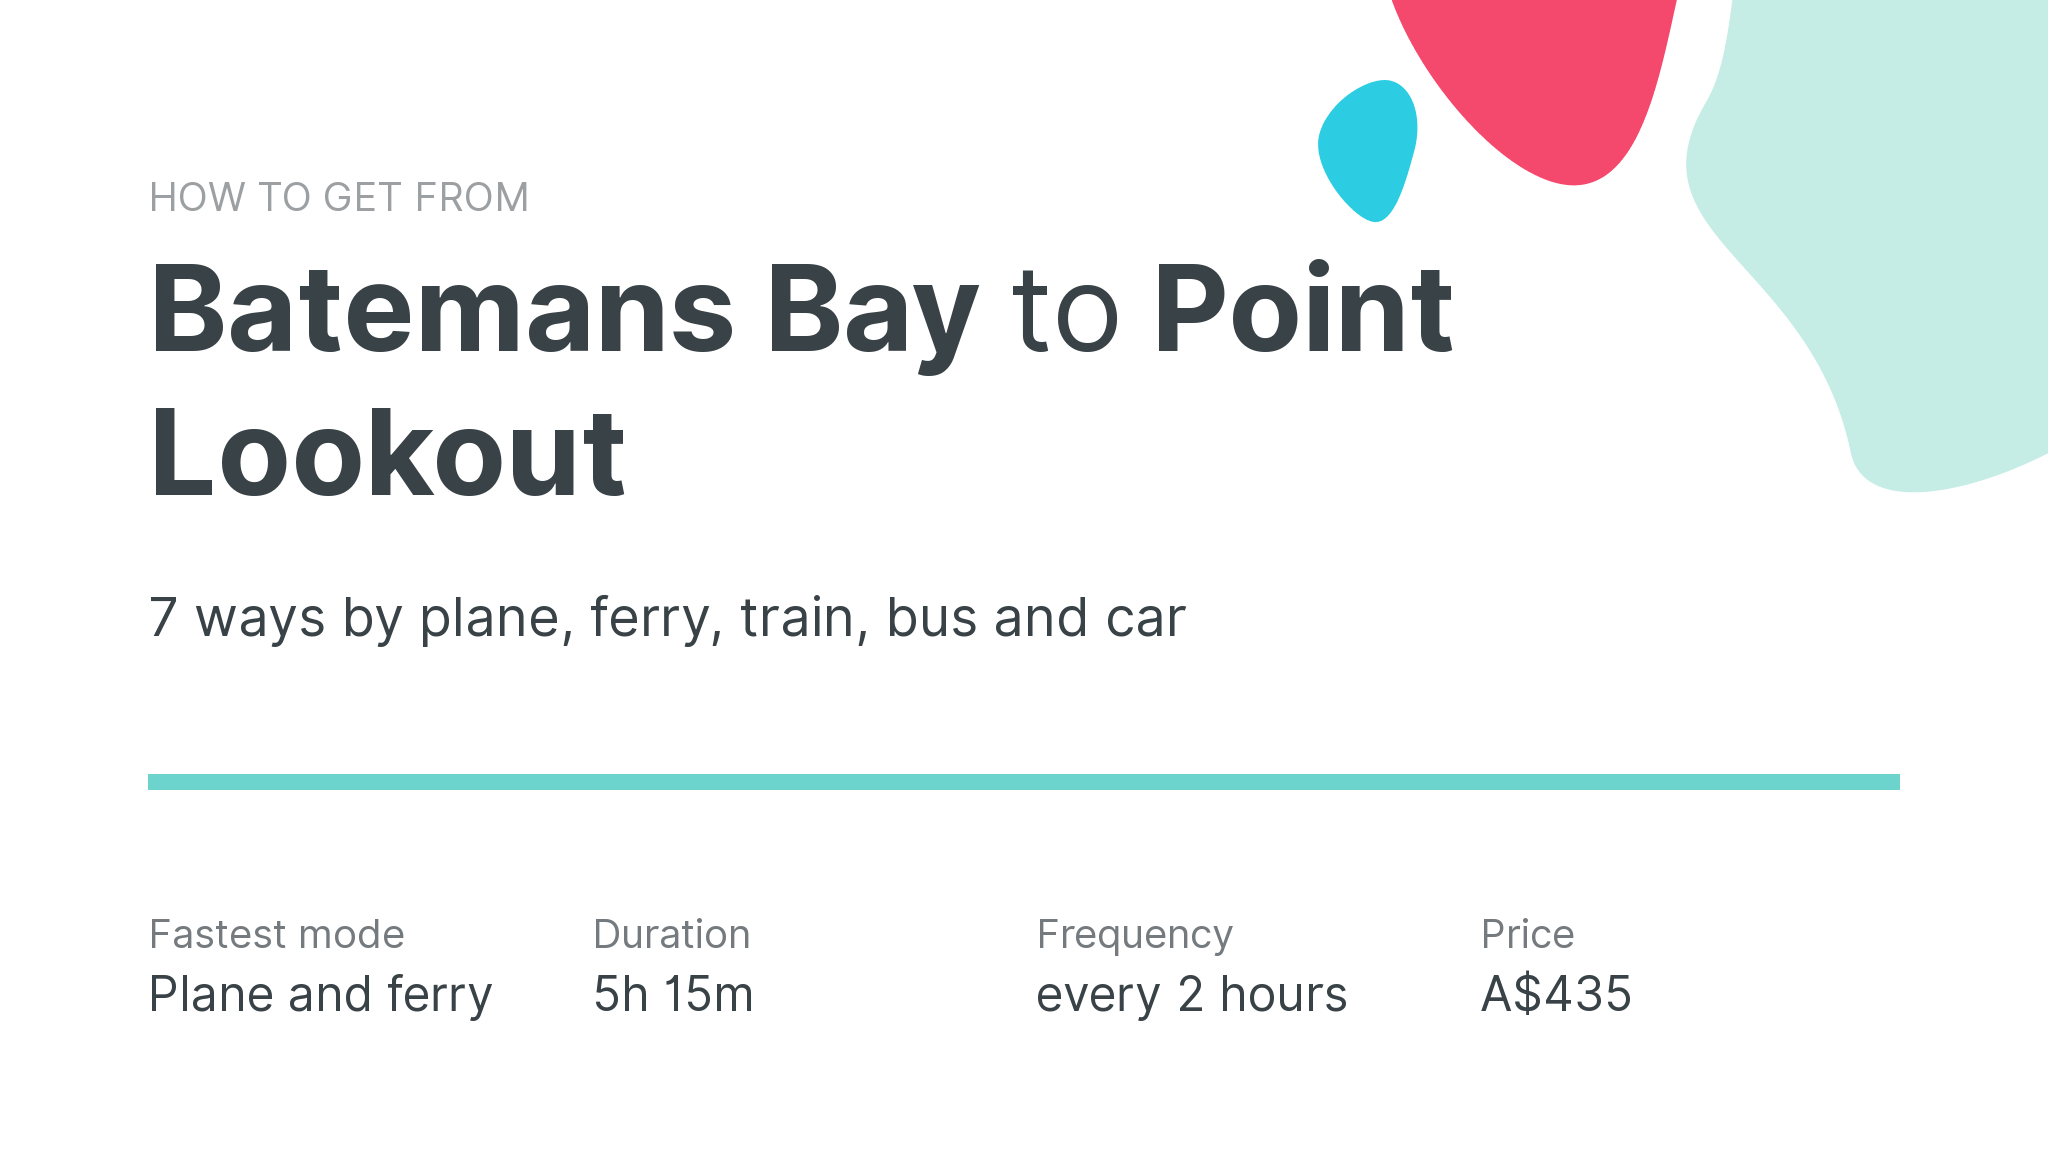 How do I get from Batemans Bay to Point Lookout